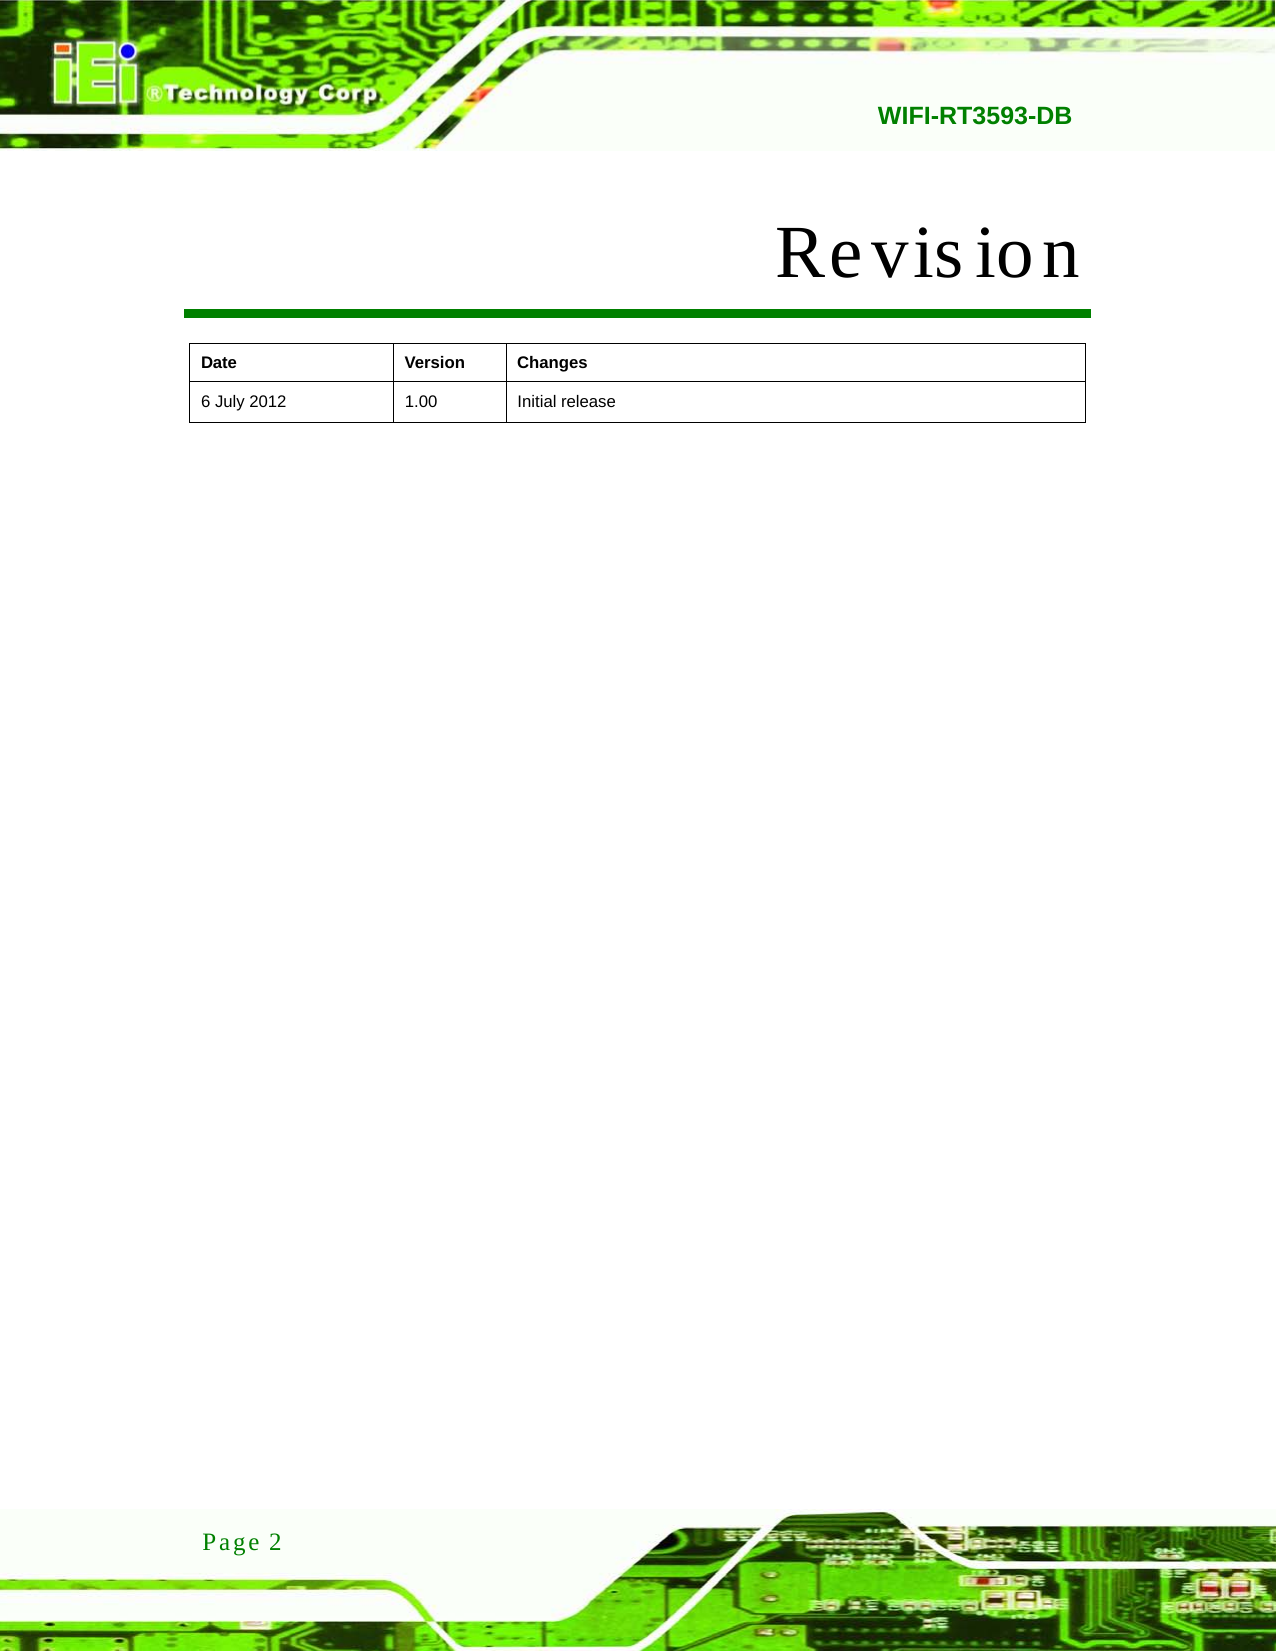   WIFI-RT3593-DB  Page 2 Revis ion   Date Version Changes 6 July 2012 1.00 Initial release   